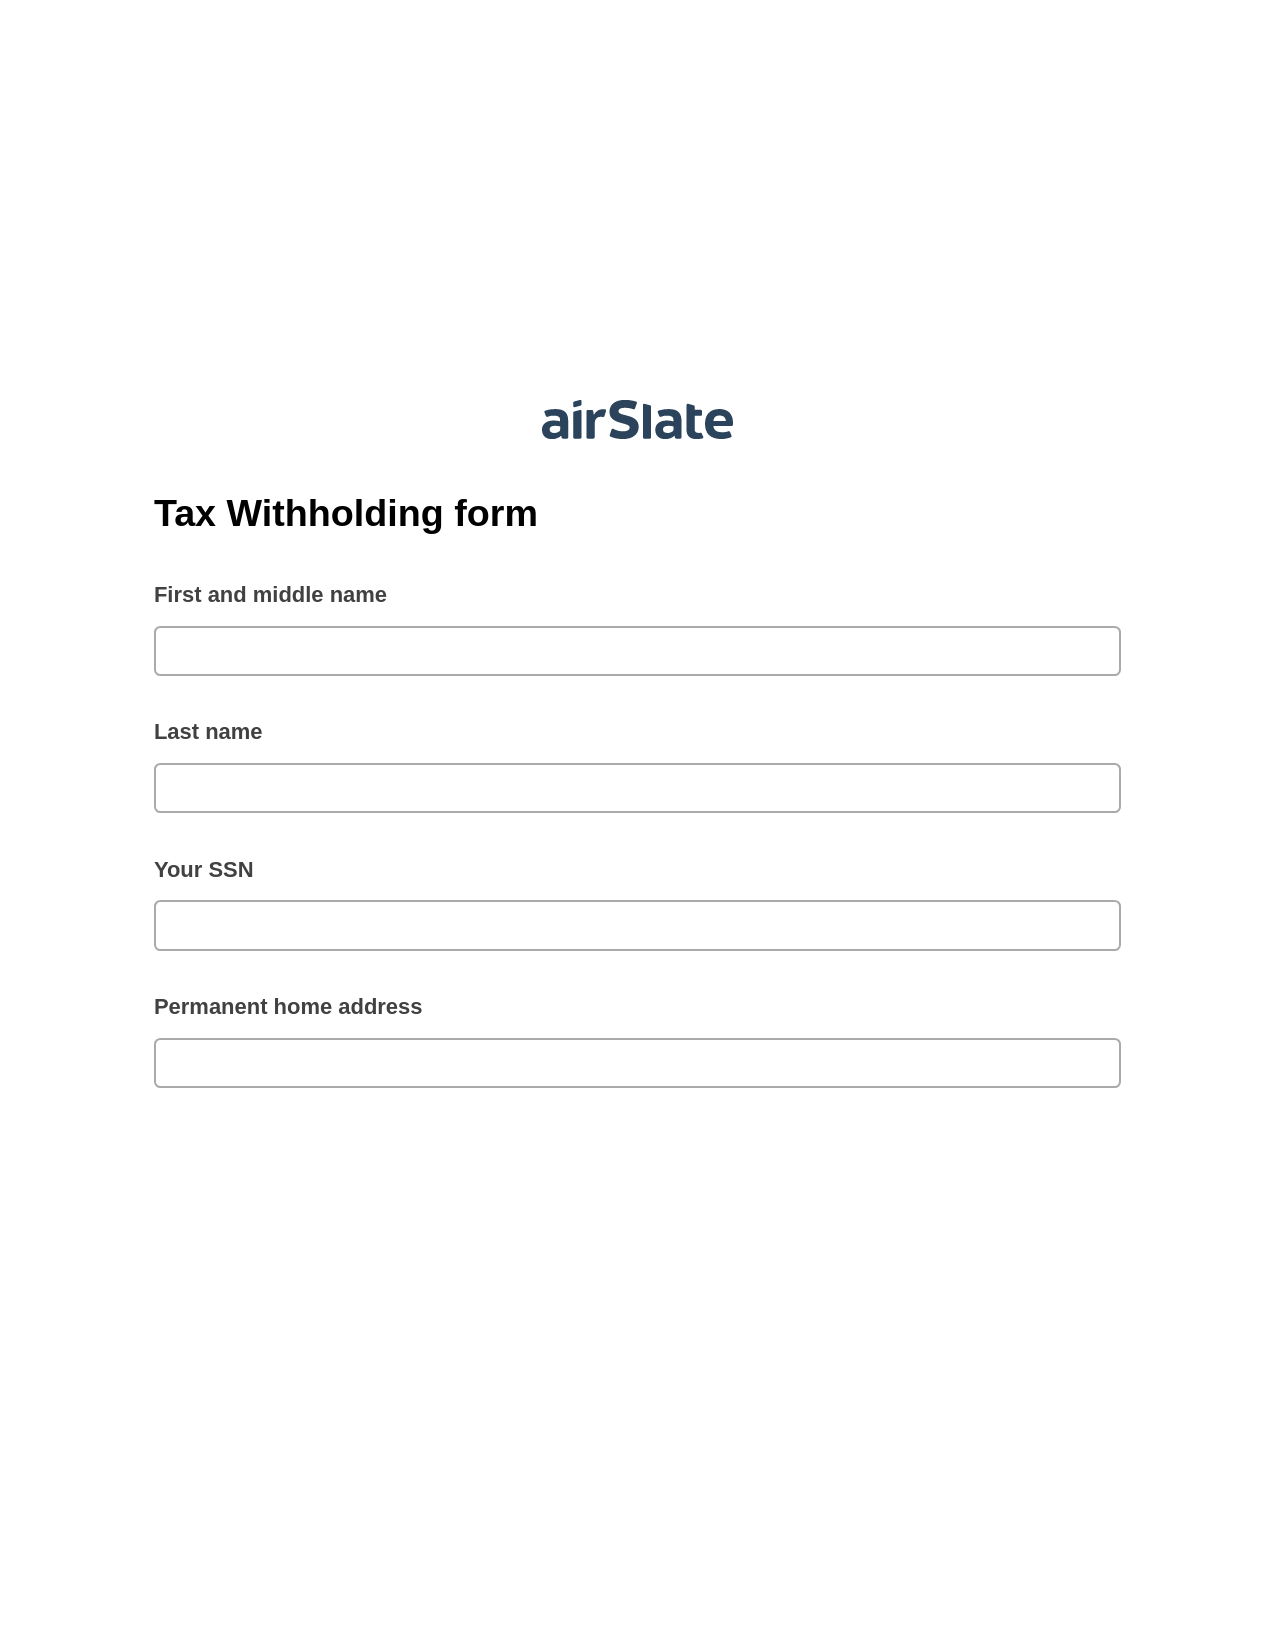 Multirole Tax Withholding form Pre-fill Document Bot, Audit Trail Bot, Box Bot